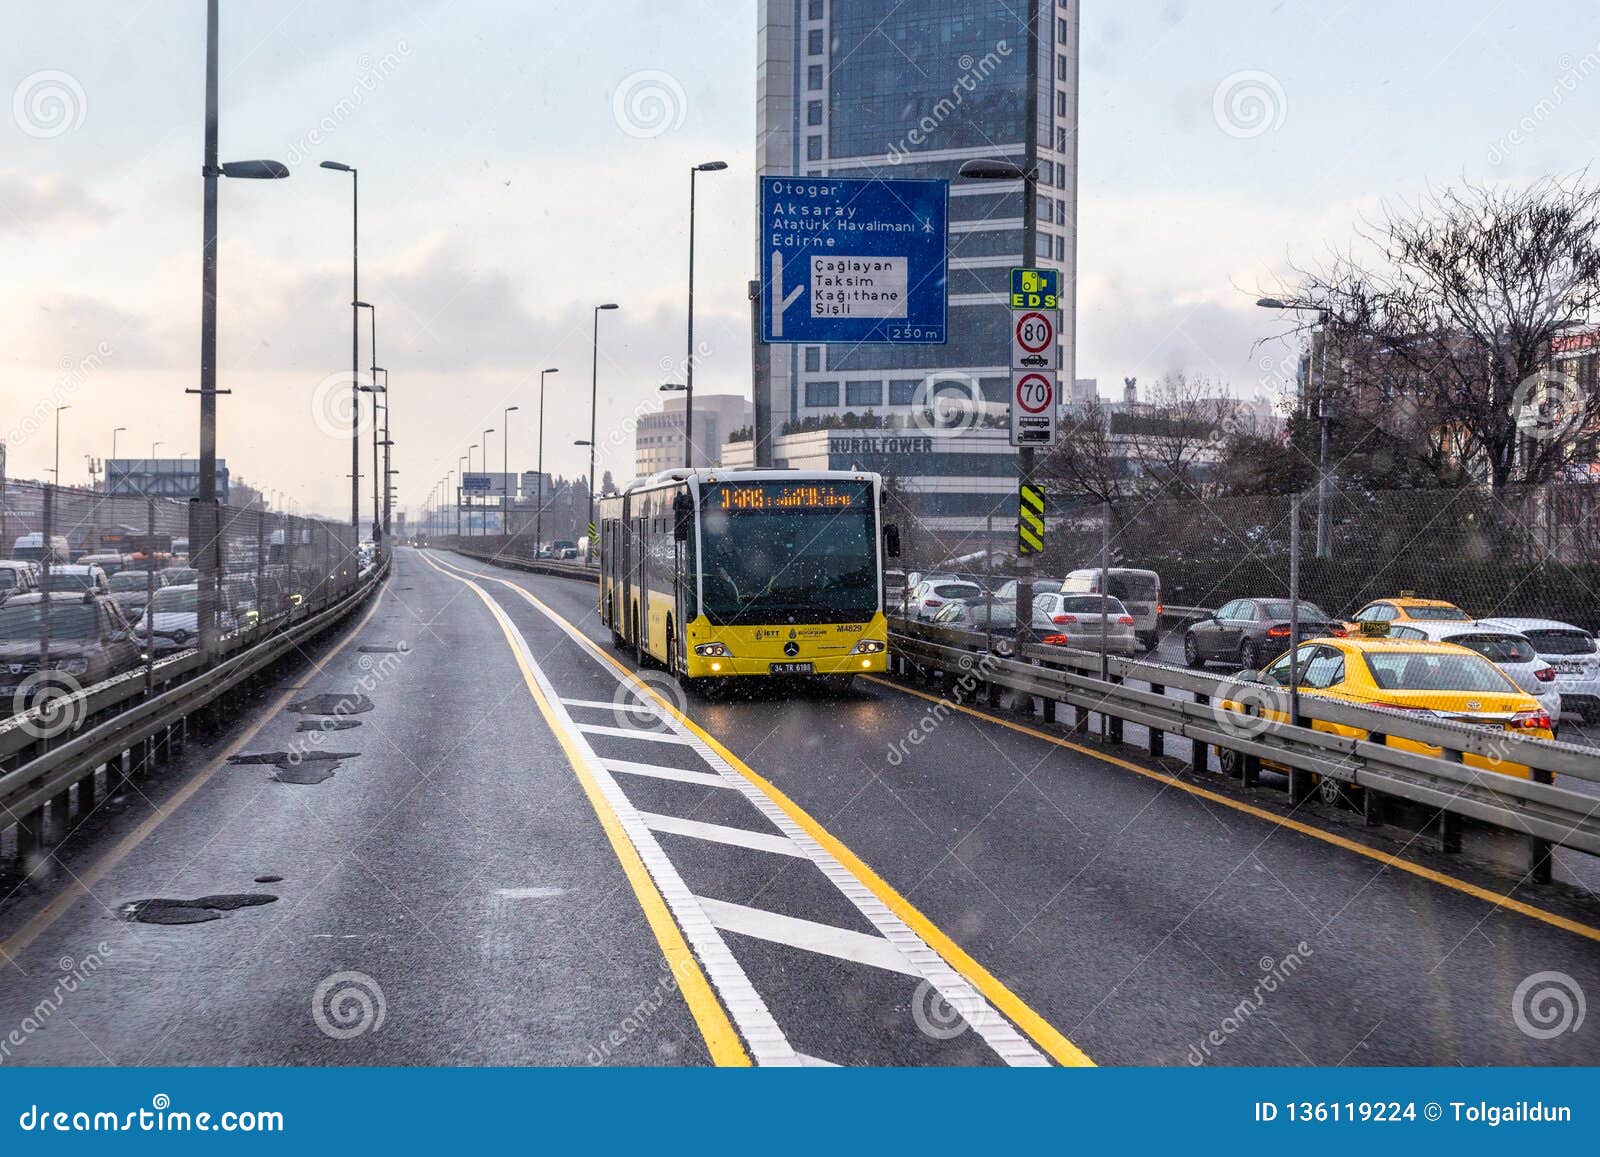 snowy winter day view from metrobus line in istanbul editorial stock image image of rapid passenger 136119224